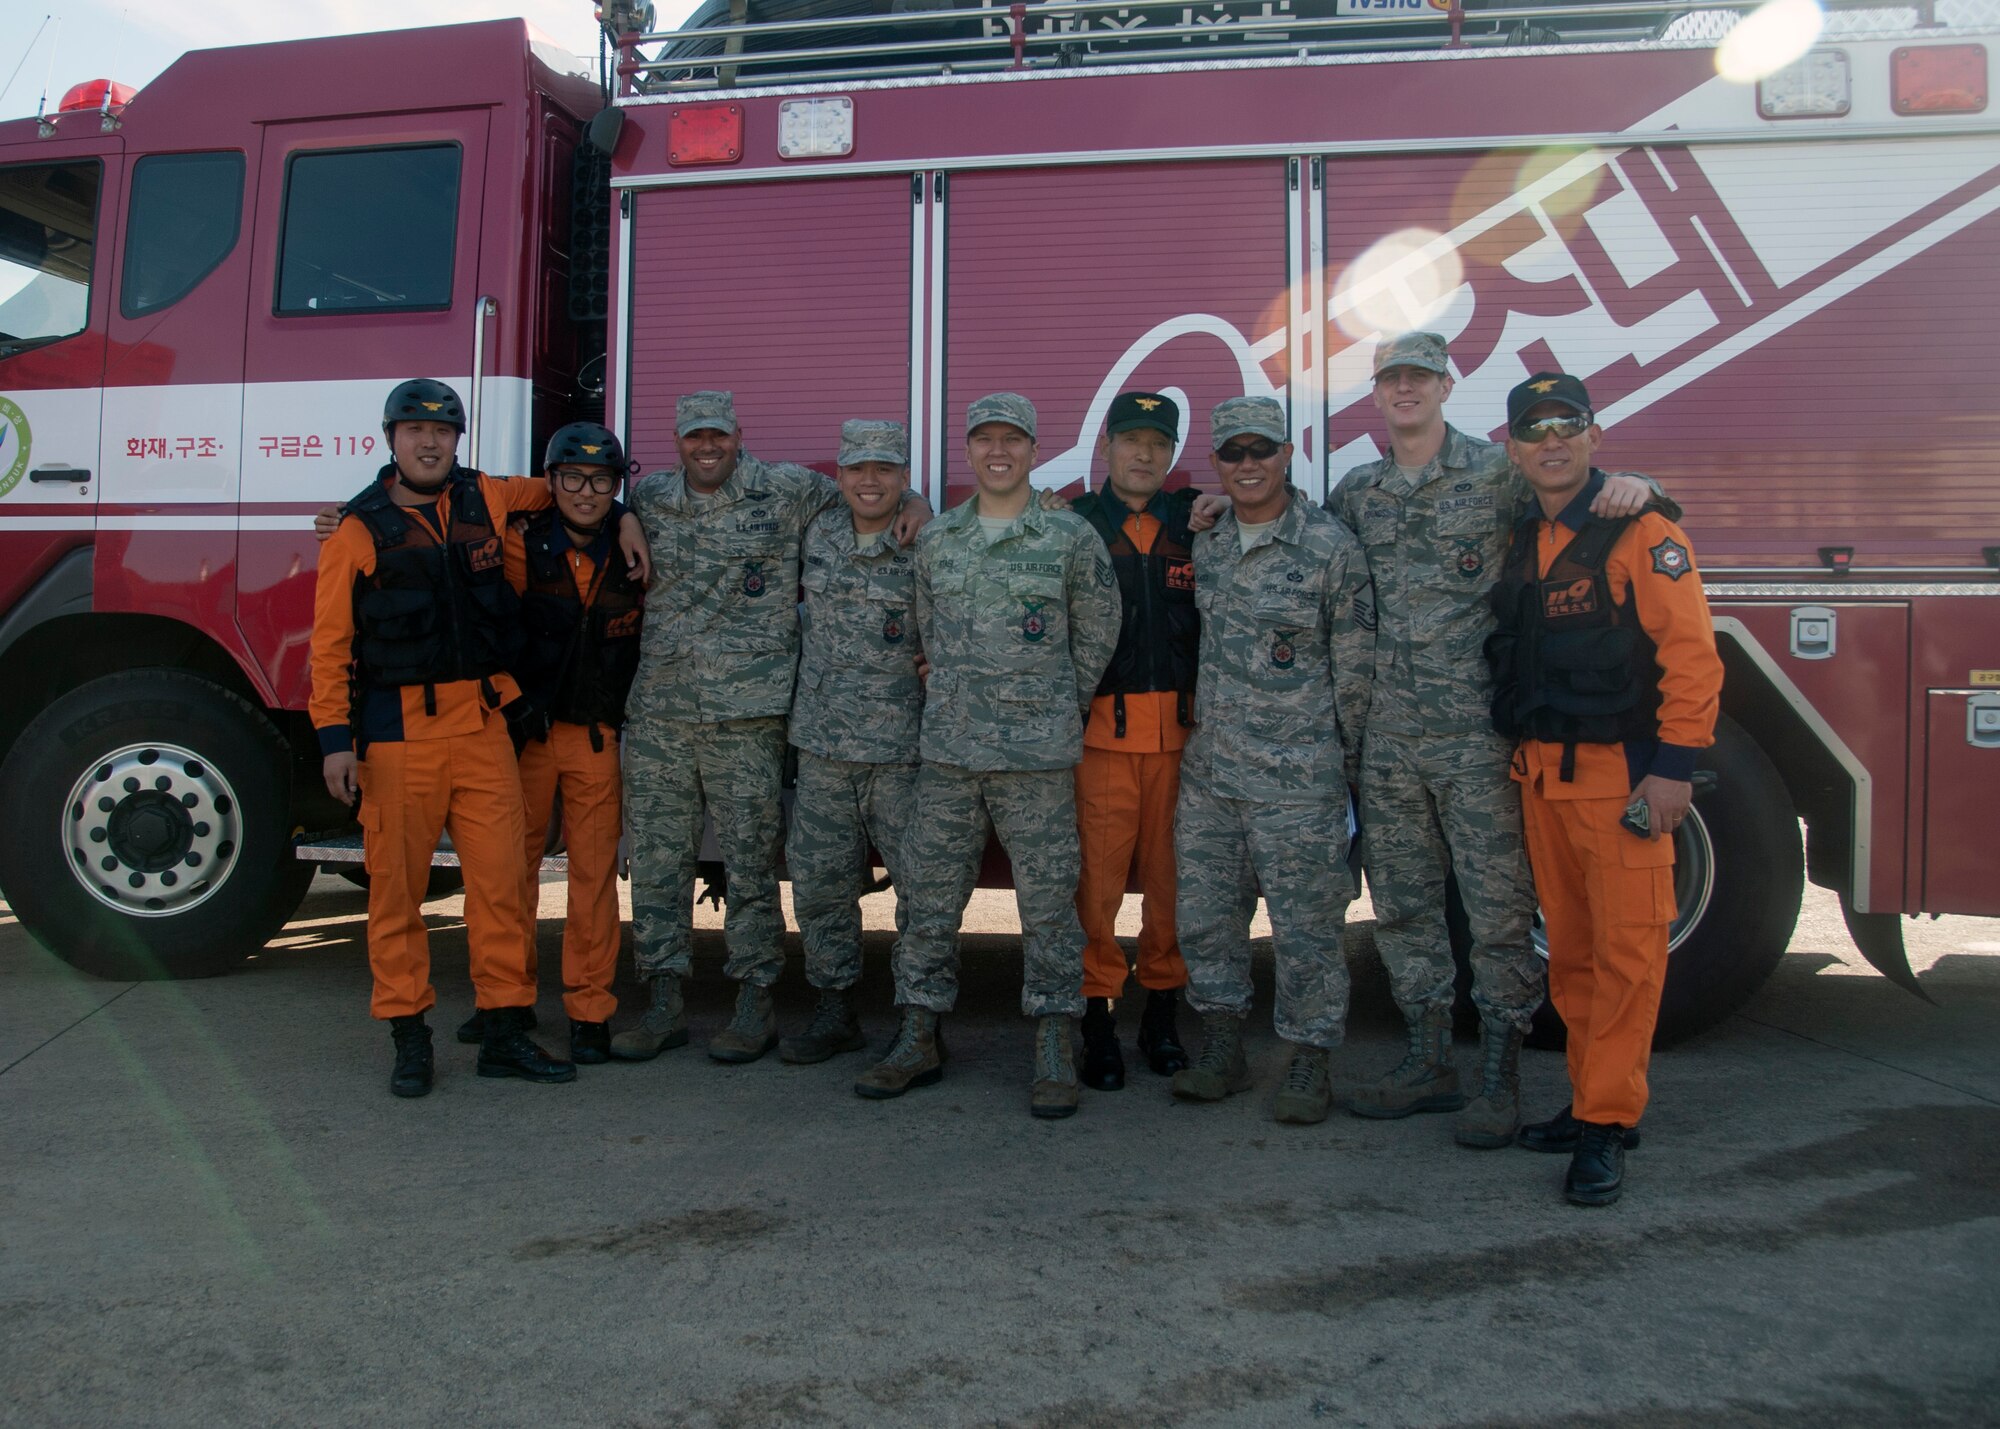 Kunsan Air Base and Gunsan City firefighters pose for a group photo together during an emergency-relief exercise in Gunsan City, Republic of Korea, Nov. 5, 2014. The purpose of the exercise was to establish an incident command system between multiple organizations and enhance their ability to respond to emergencies and large disasters. (U.S. Air Force photo by Senior Airman Taylor Curry/Released)